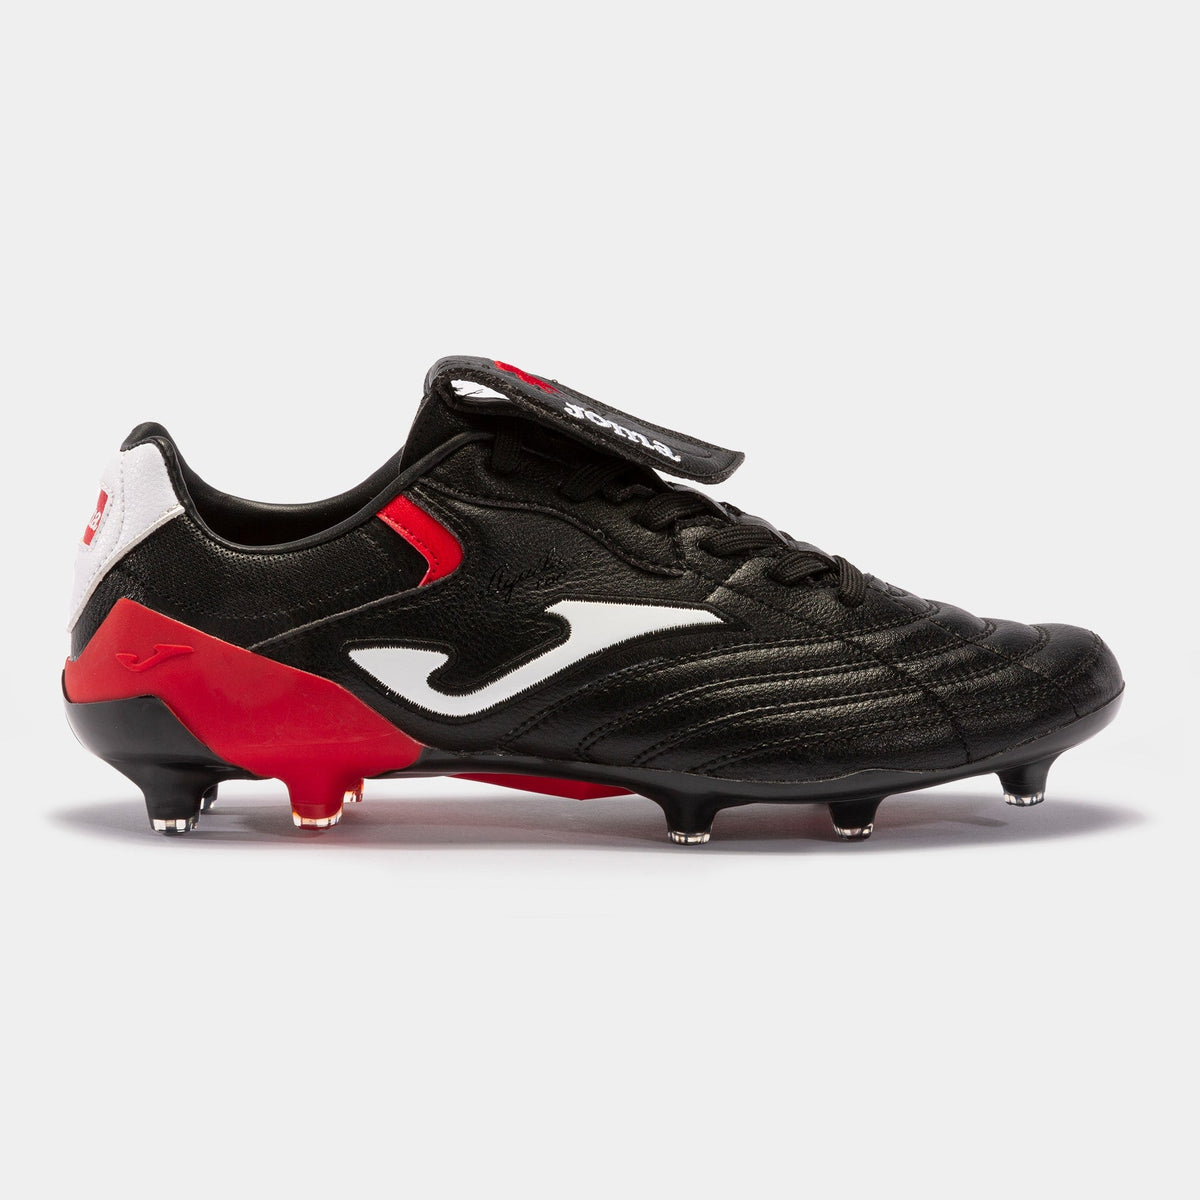 JOMA Aguila Cup 2301 FG Firm Ground Cleats